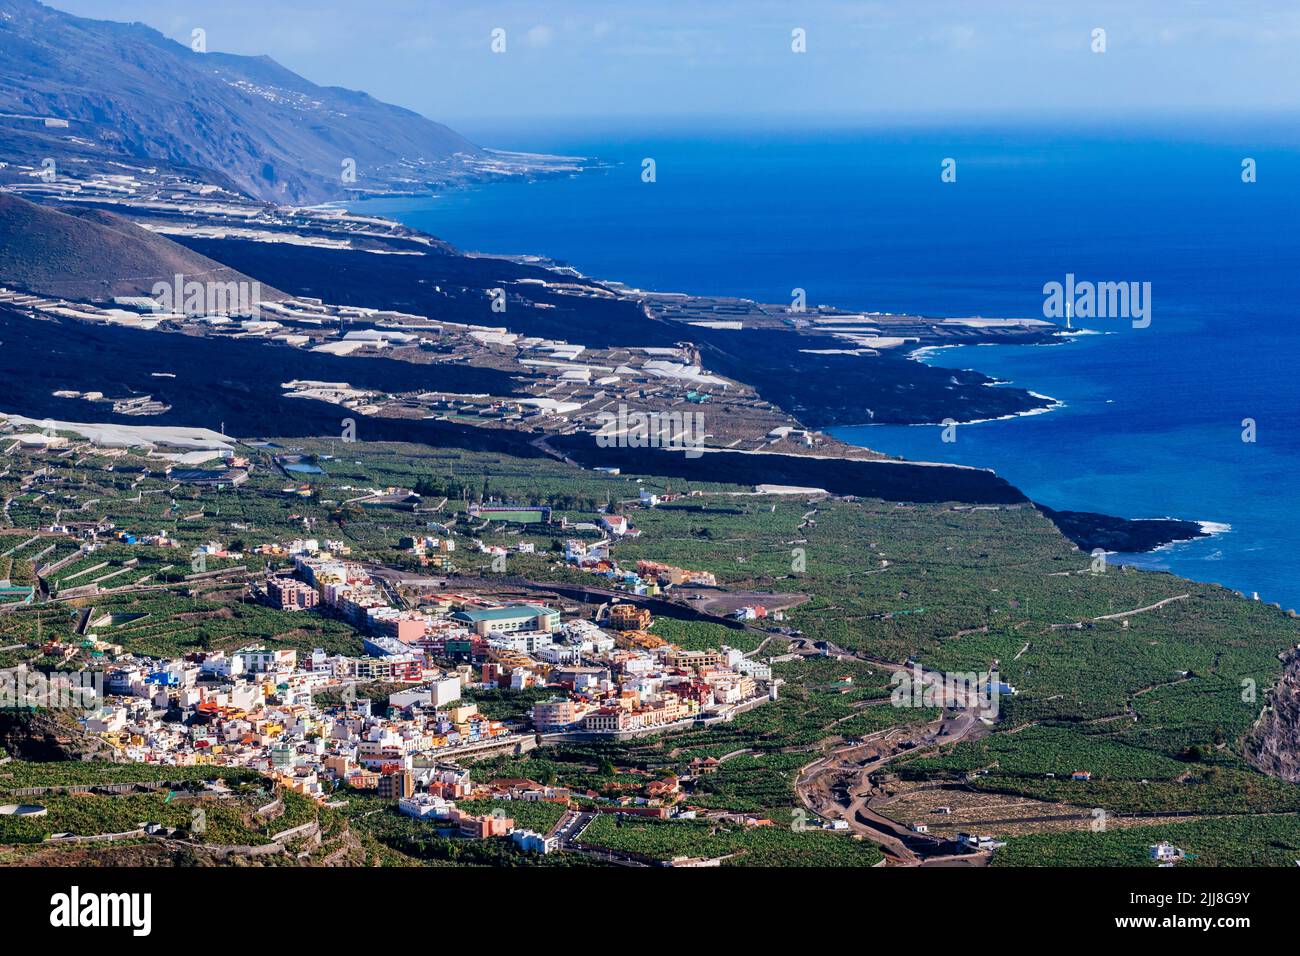 The town of Tazacorte surrounded by banana plantations. Behind the river of solidified lava that crosses the Aridane valley. La Palma, Canary Islands, Stock Photo